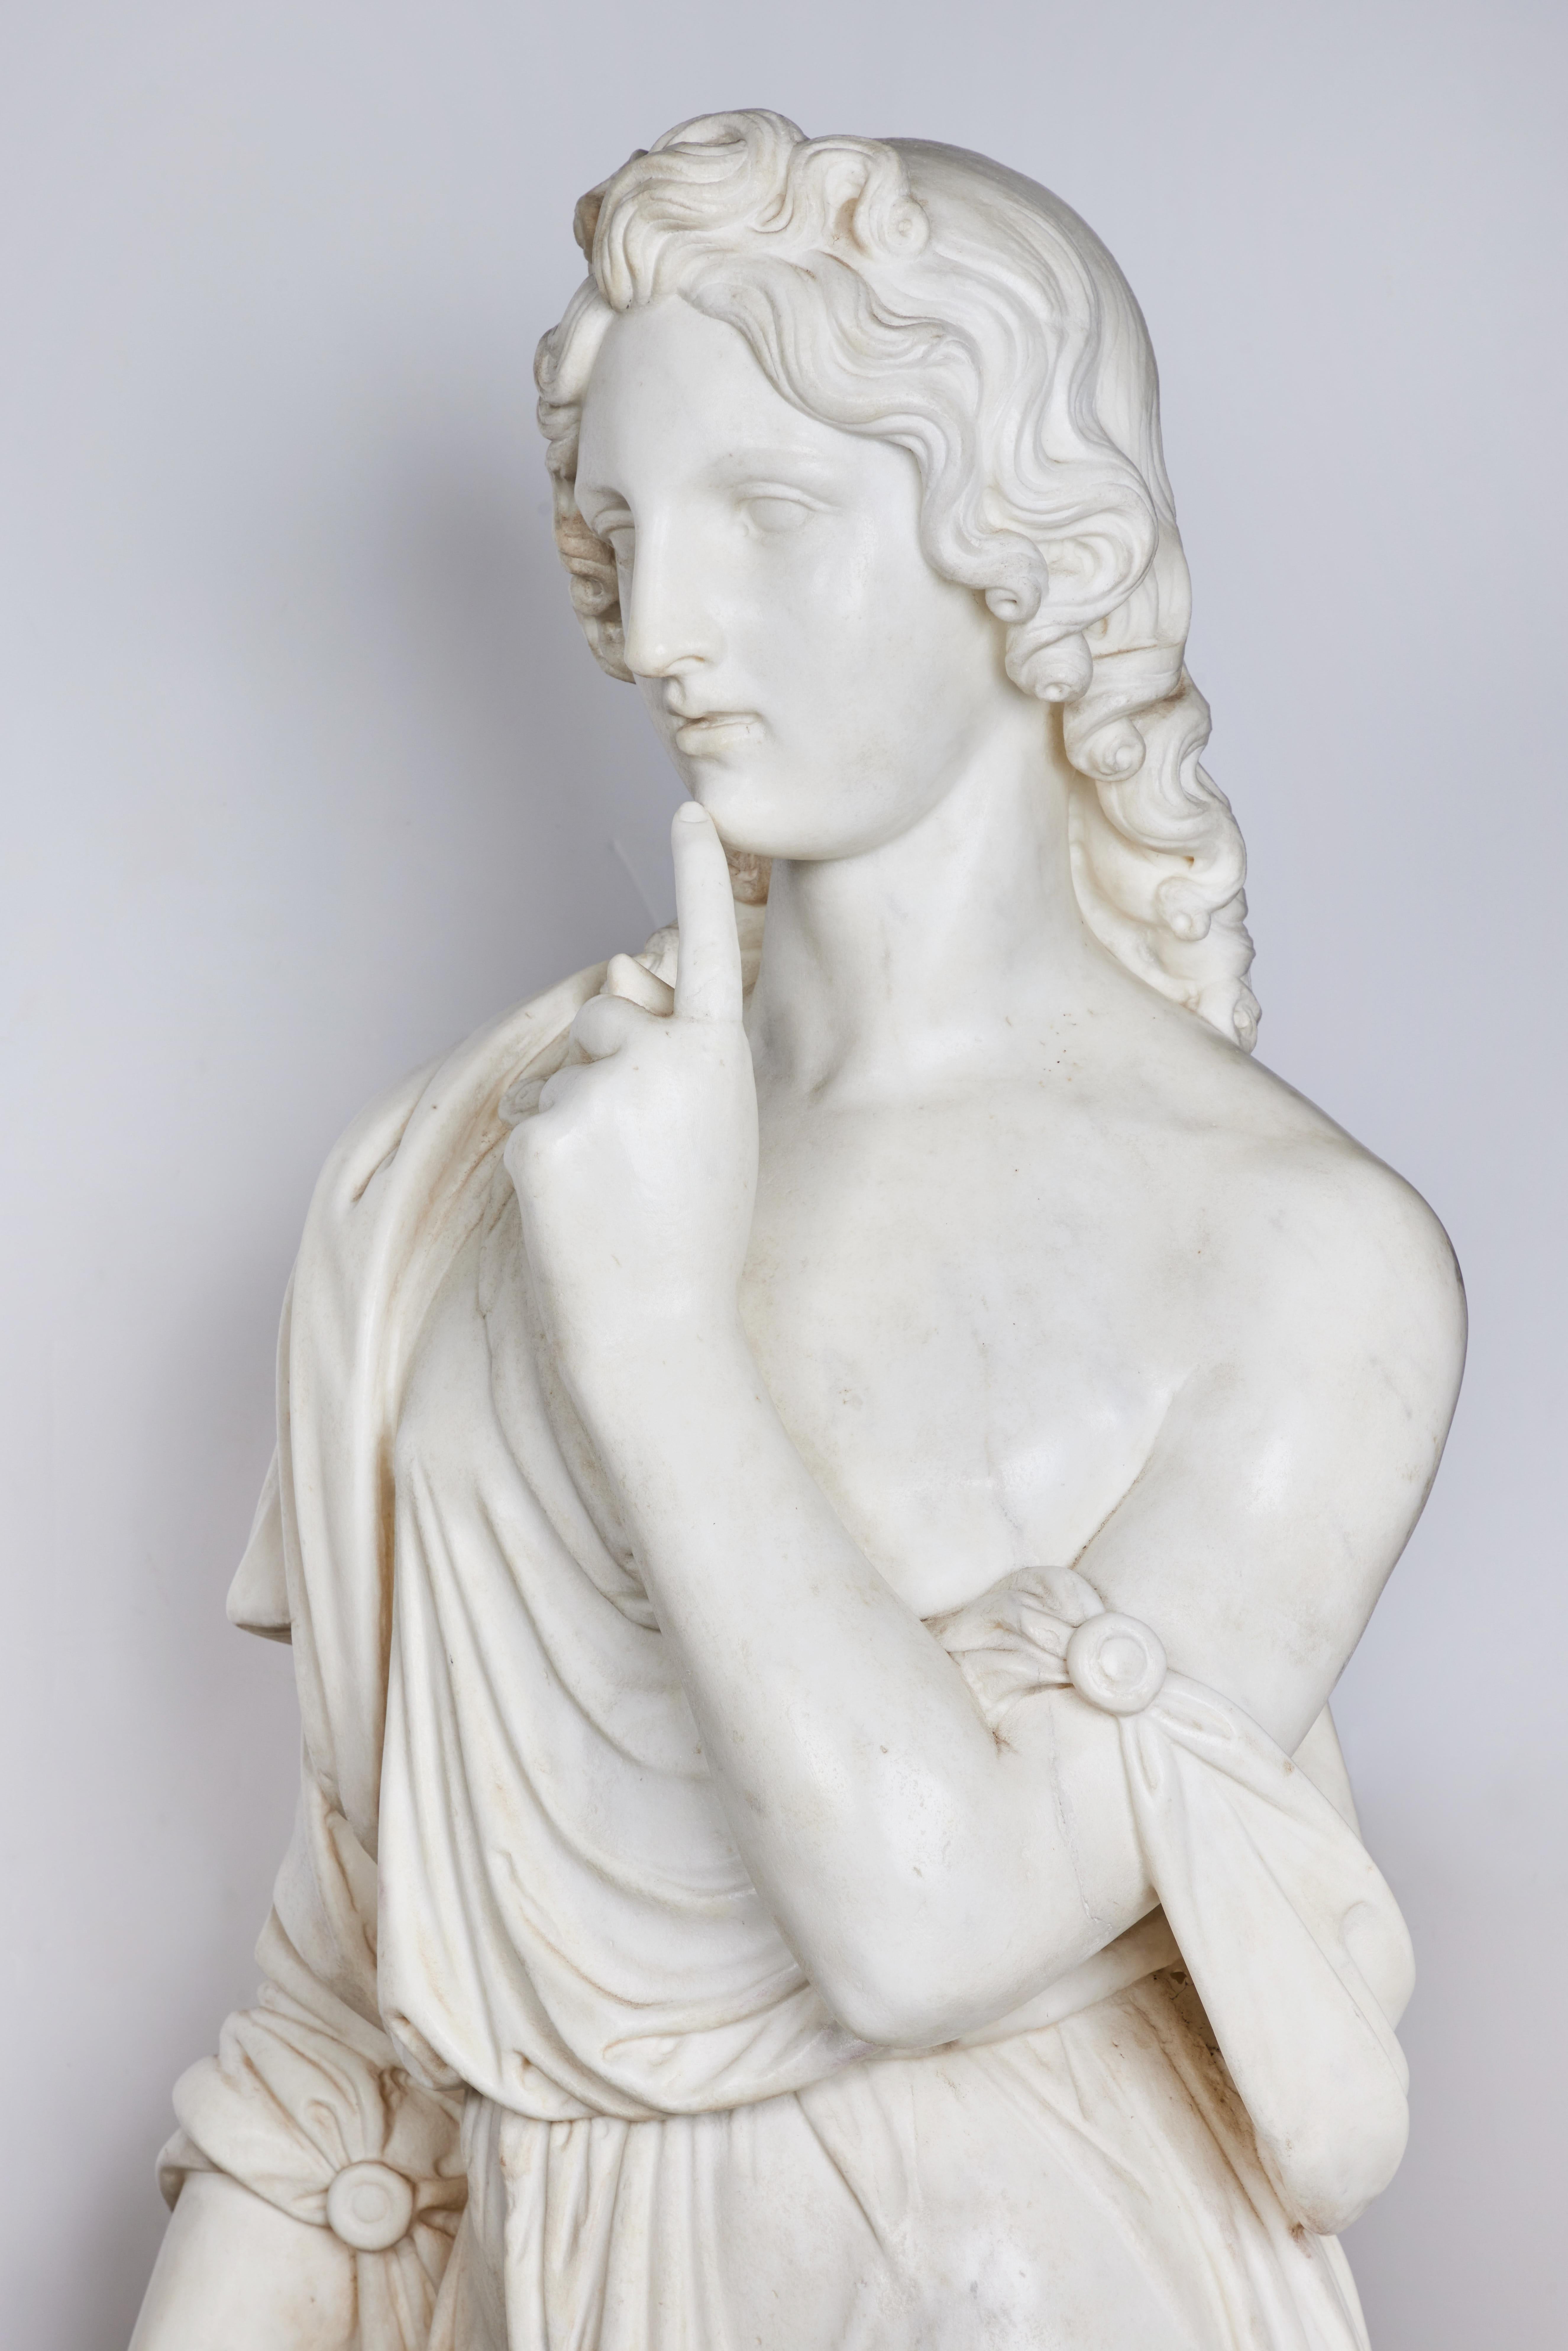 Life Size Roman Marble Figure - Sculpture by Unknown